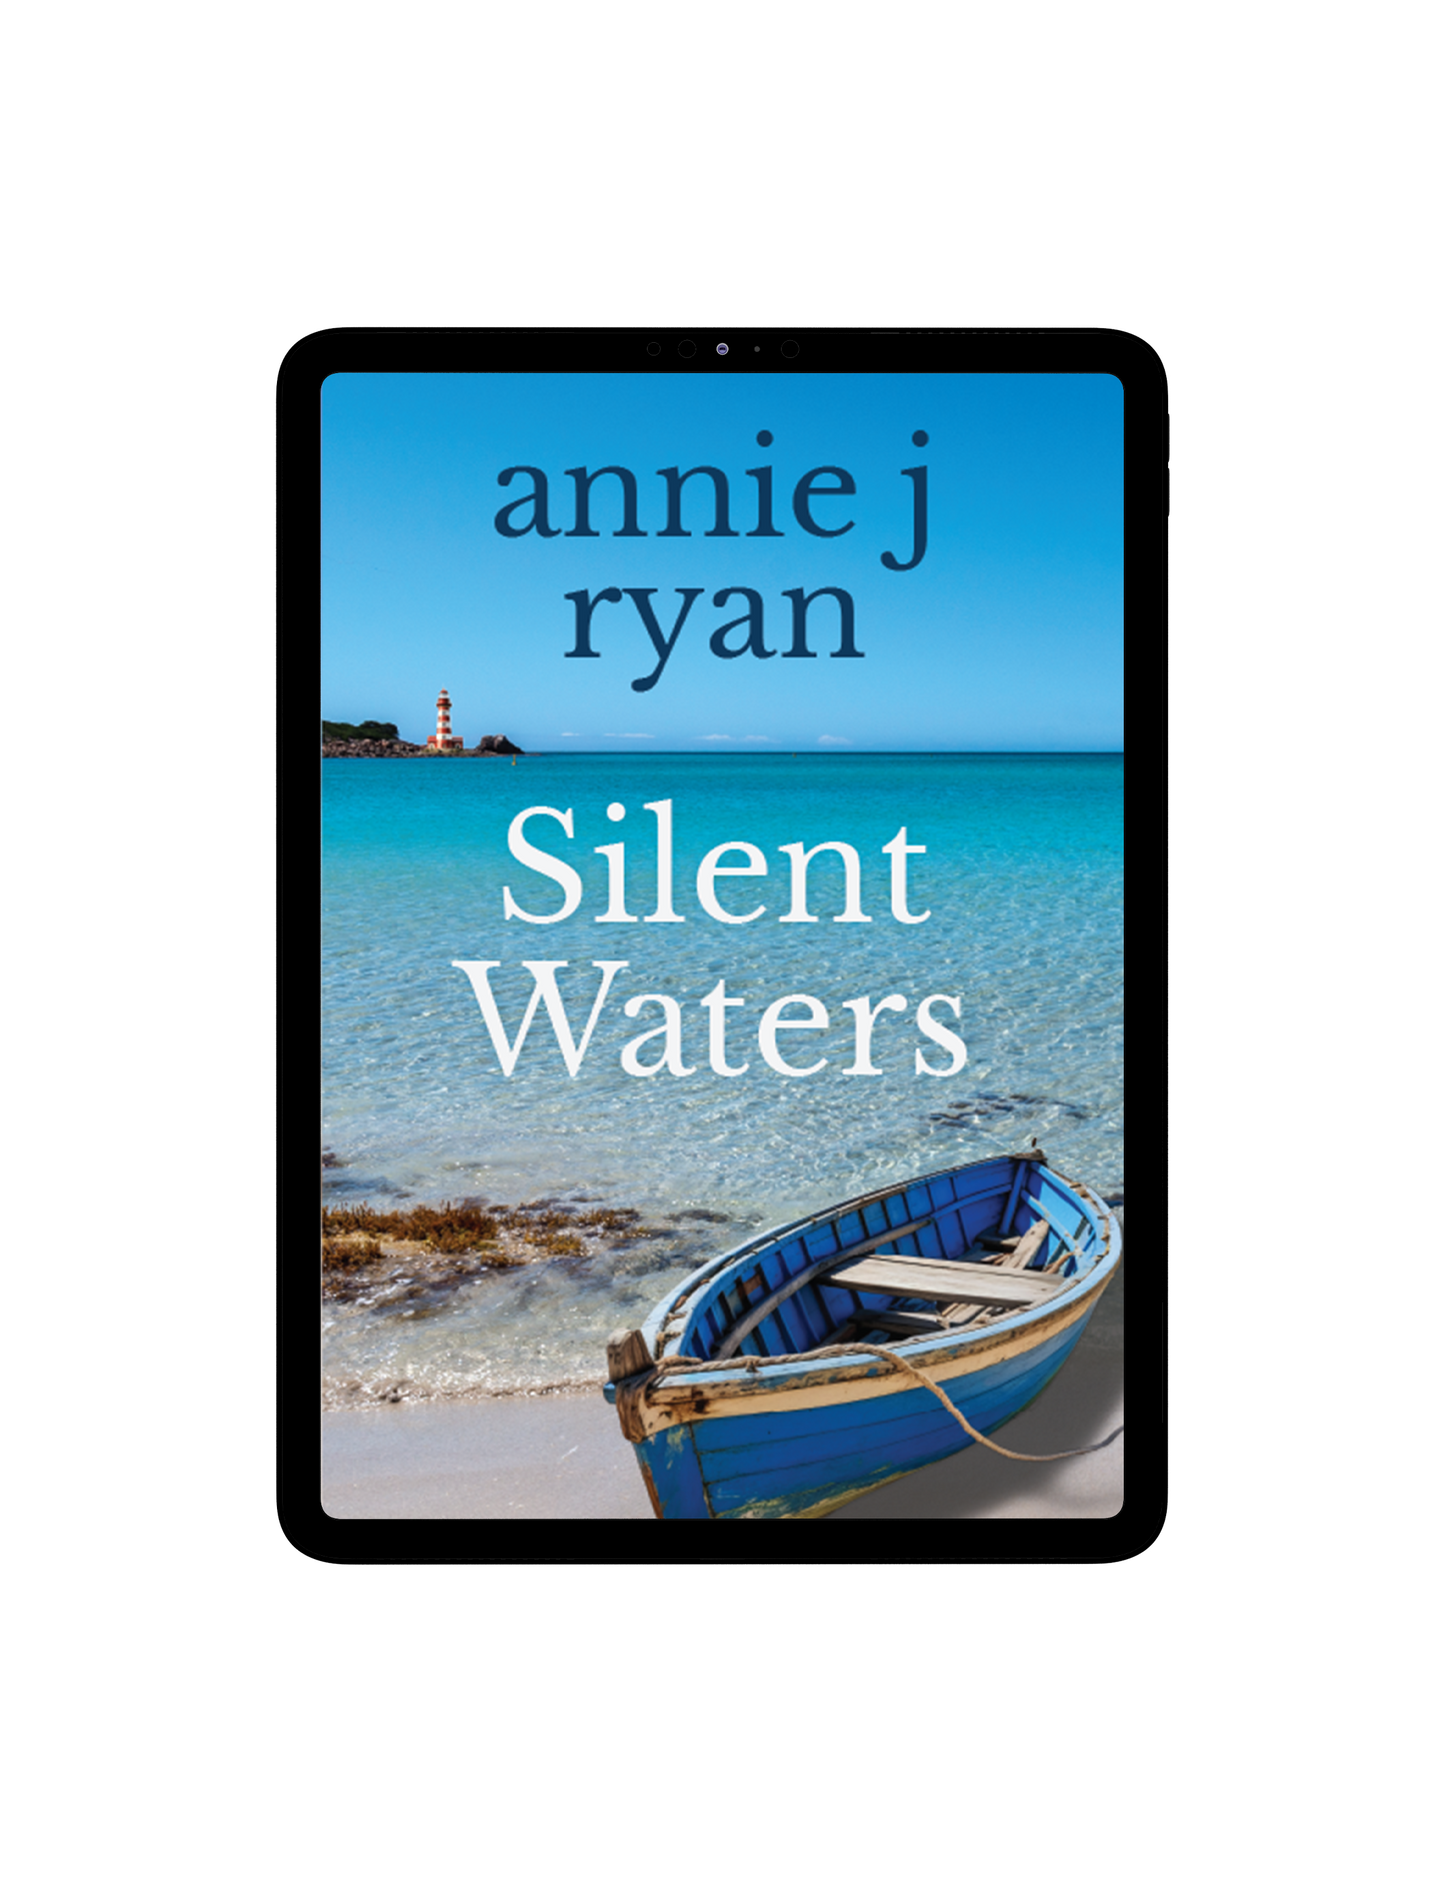 Silent Waters EBook, Annie J Ryan, Romantic Suspense, Book Club Fiction, Family Life Fiction, Domestic Life Fiction, Small town and rural fiction, women's fiction, Contemporary women's fiction, Mothers and children fiction